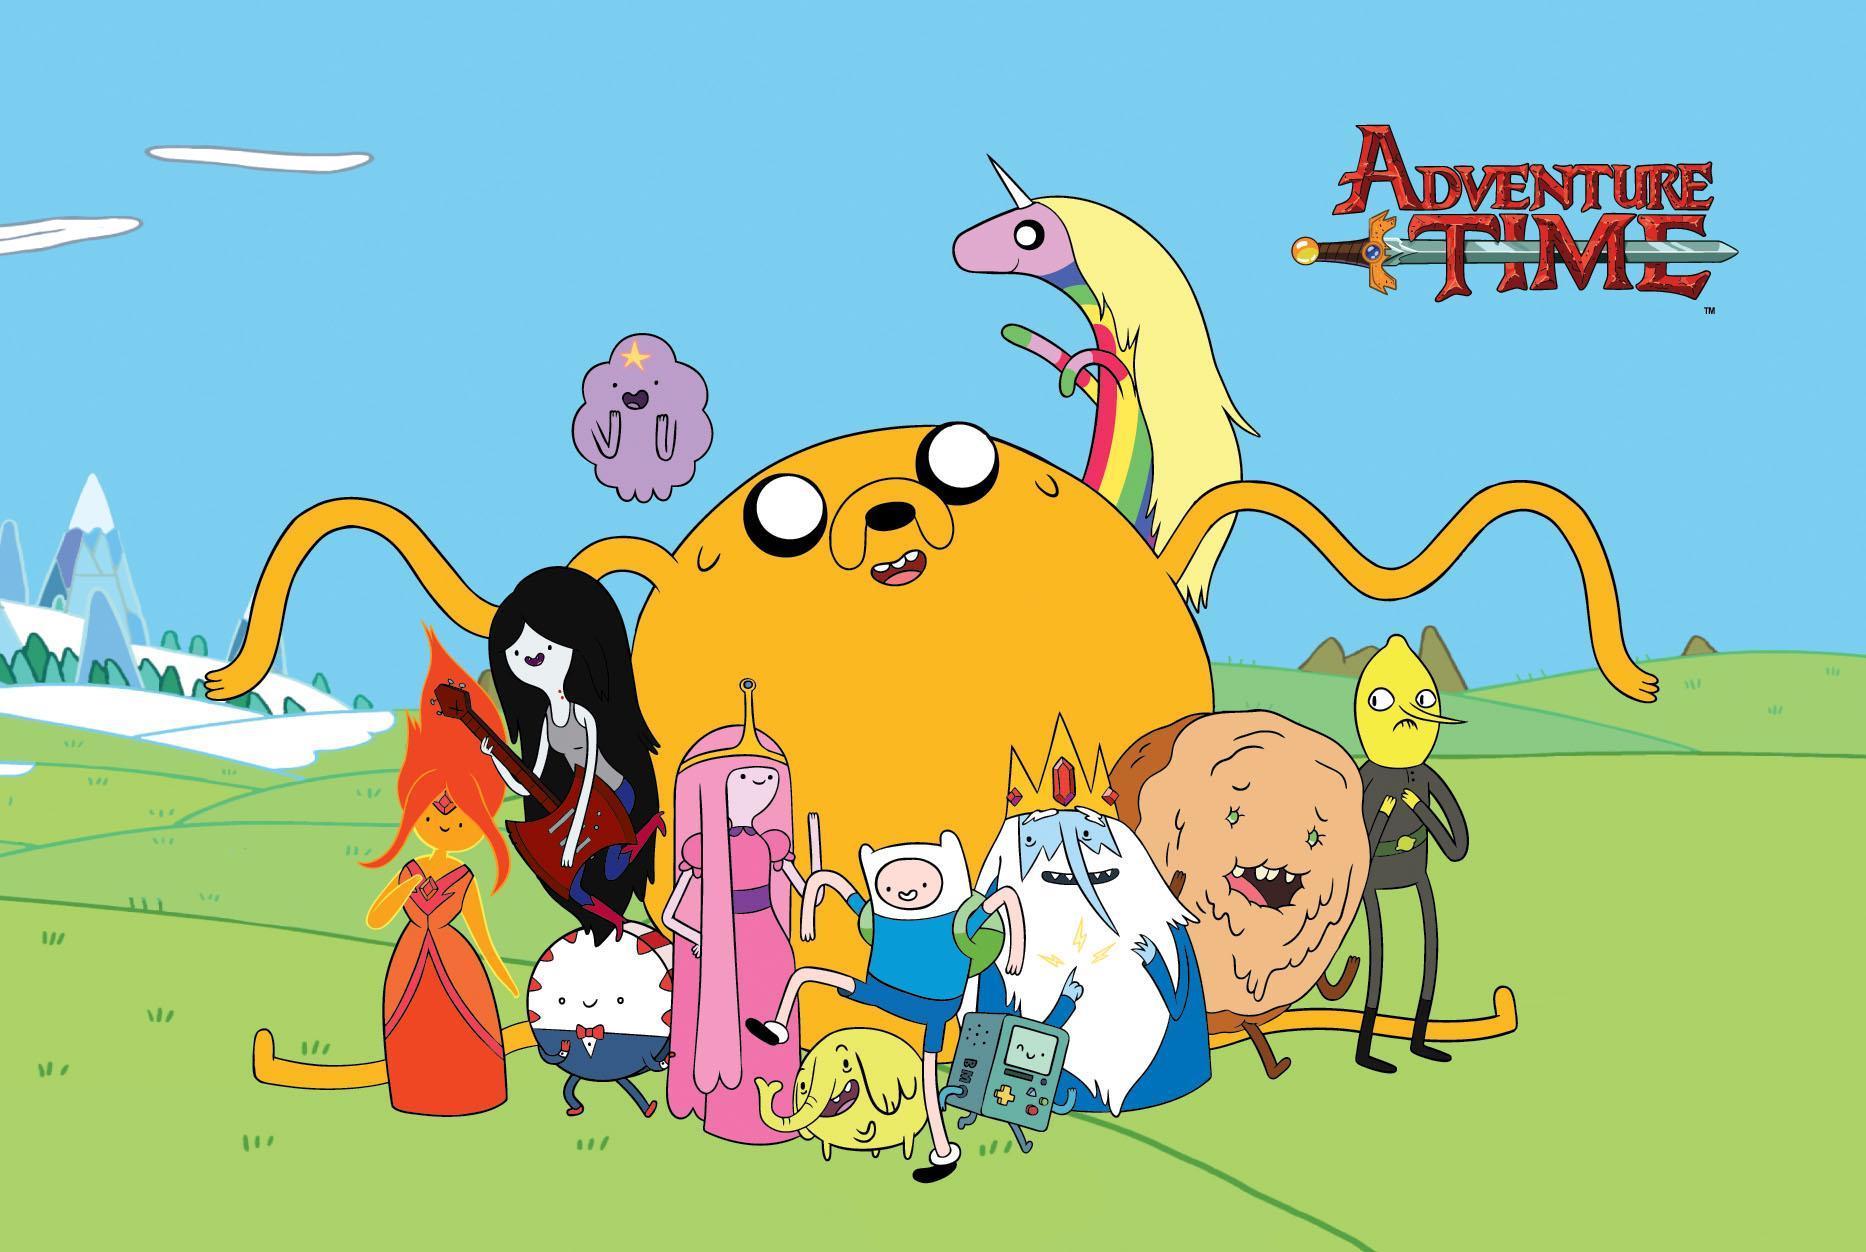 Six mathematical apps for Adventure Time fans.